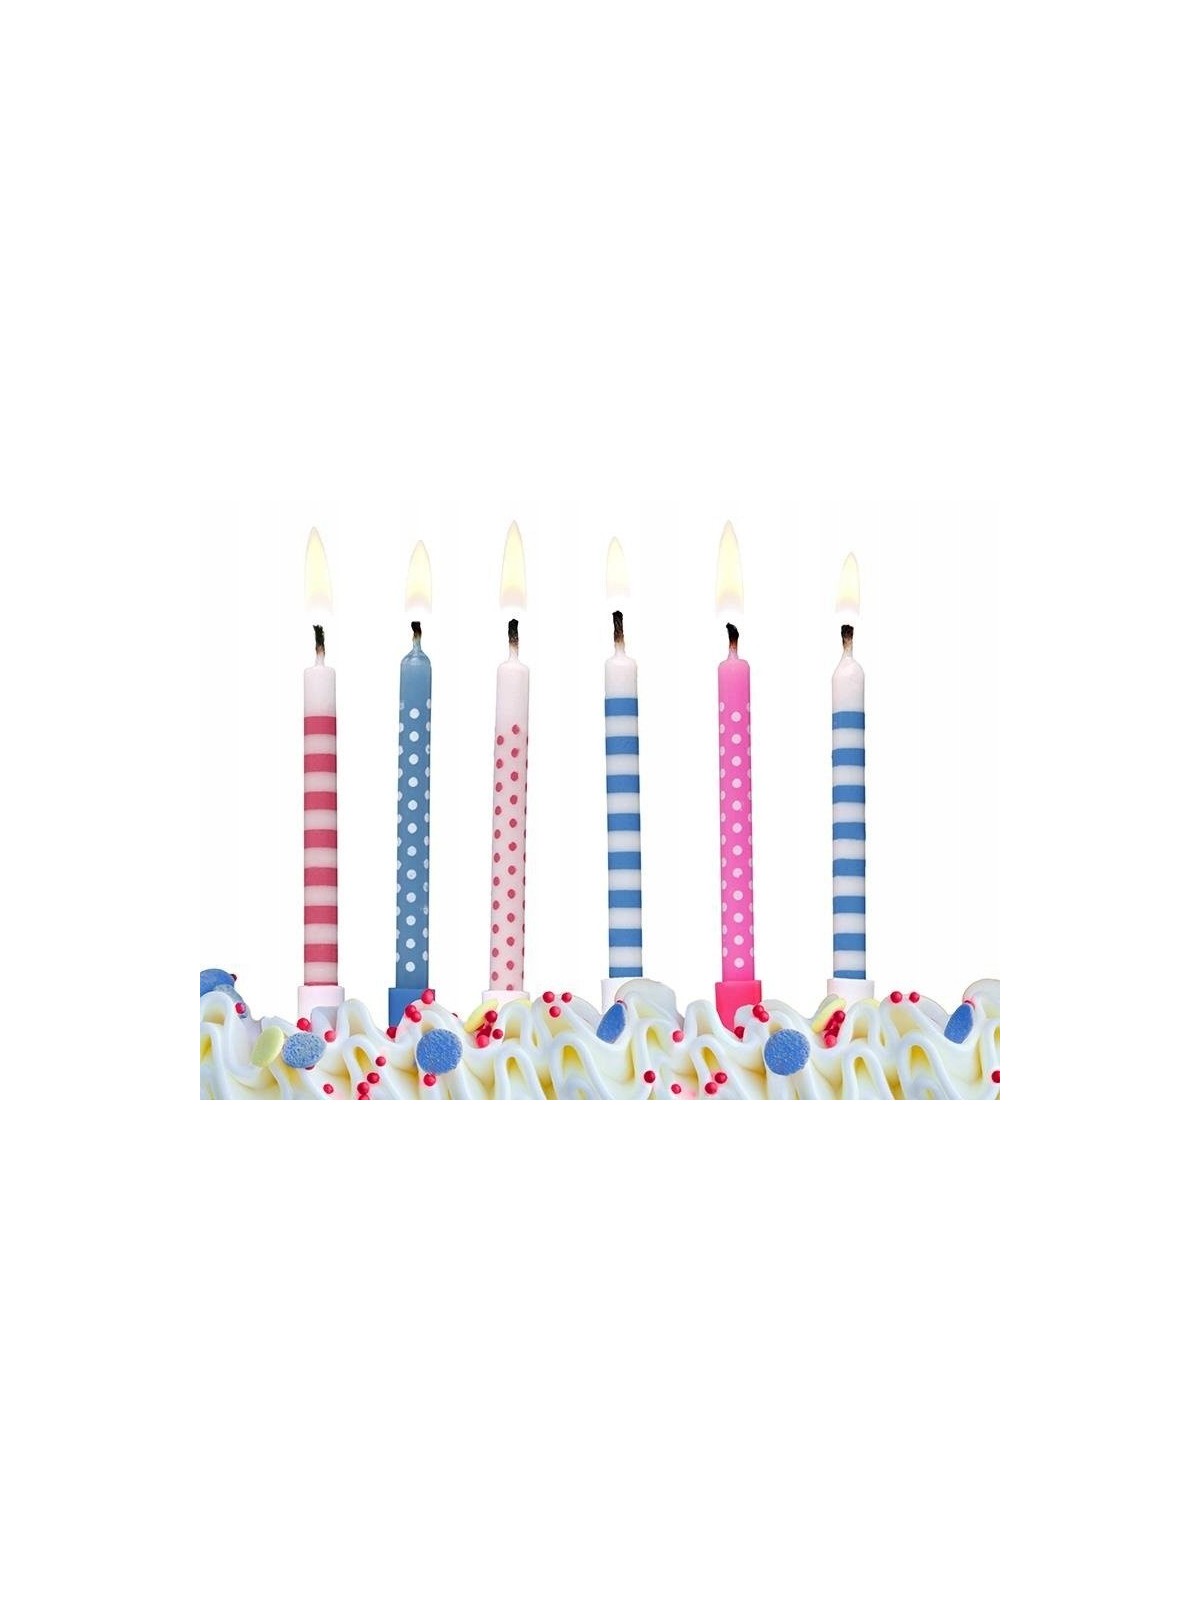 PartyDeco birthday candles - stripes / dots - blue / pink 6pcs